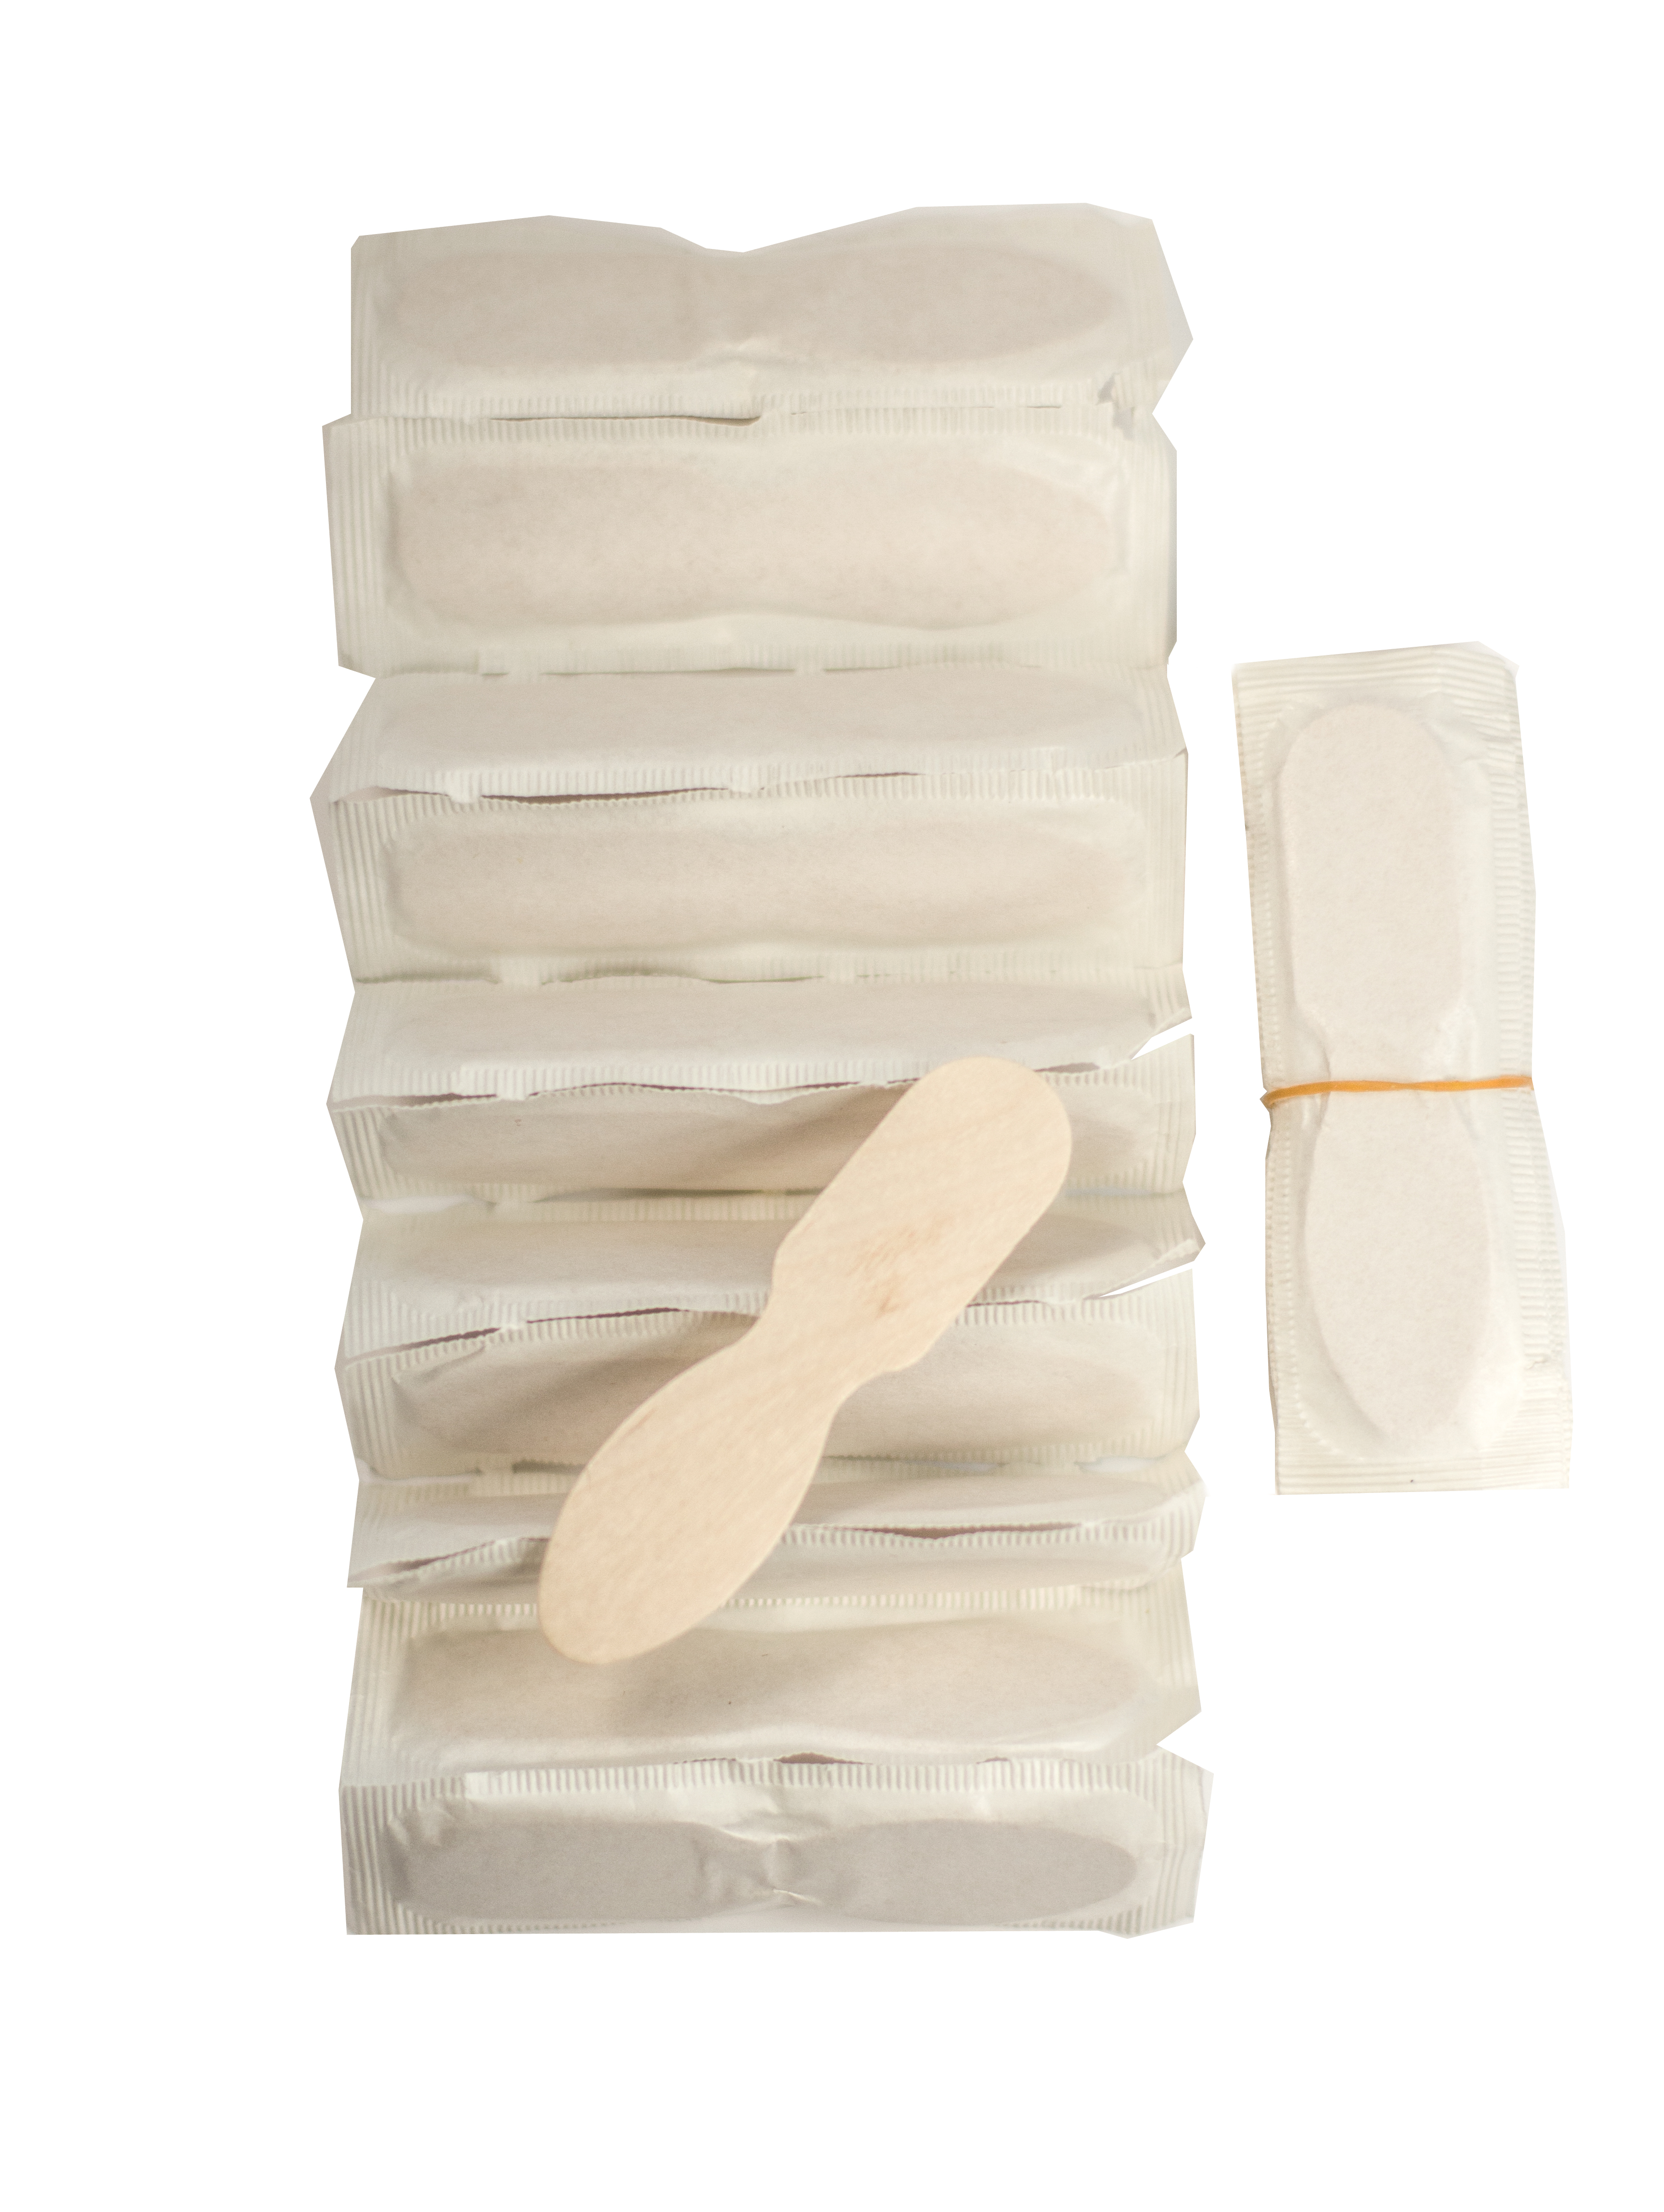 3" Plain 12 Pack Taster Spoons Paper Wrapped Individually Case of 12 pk/900ct = 10,800ct (Item# ASO24W12P)